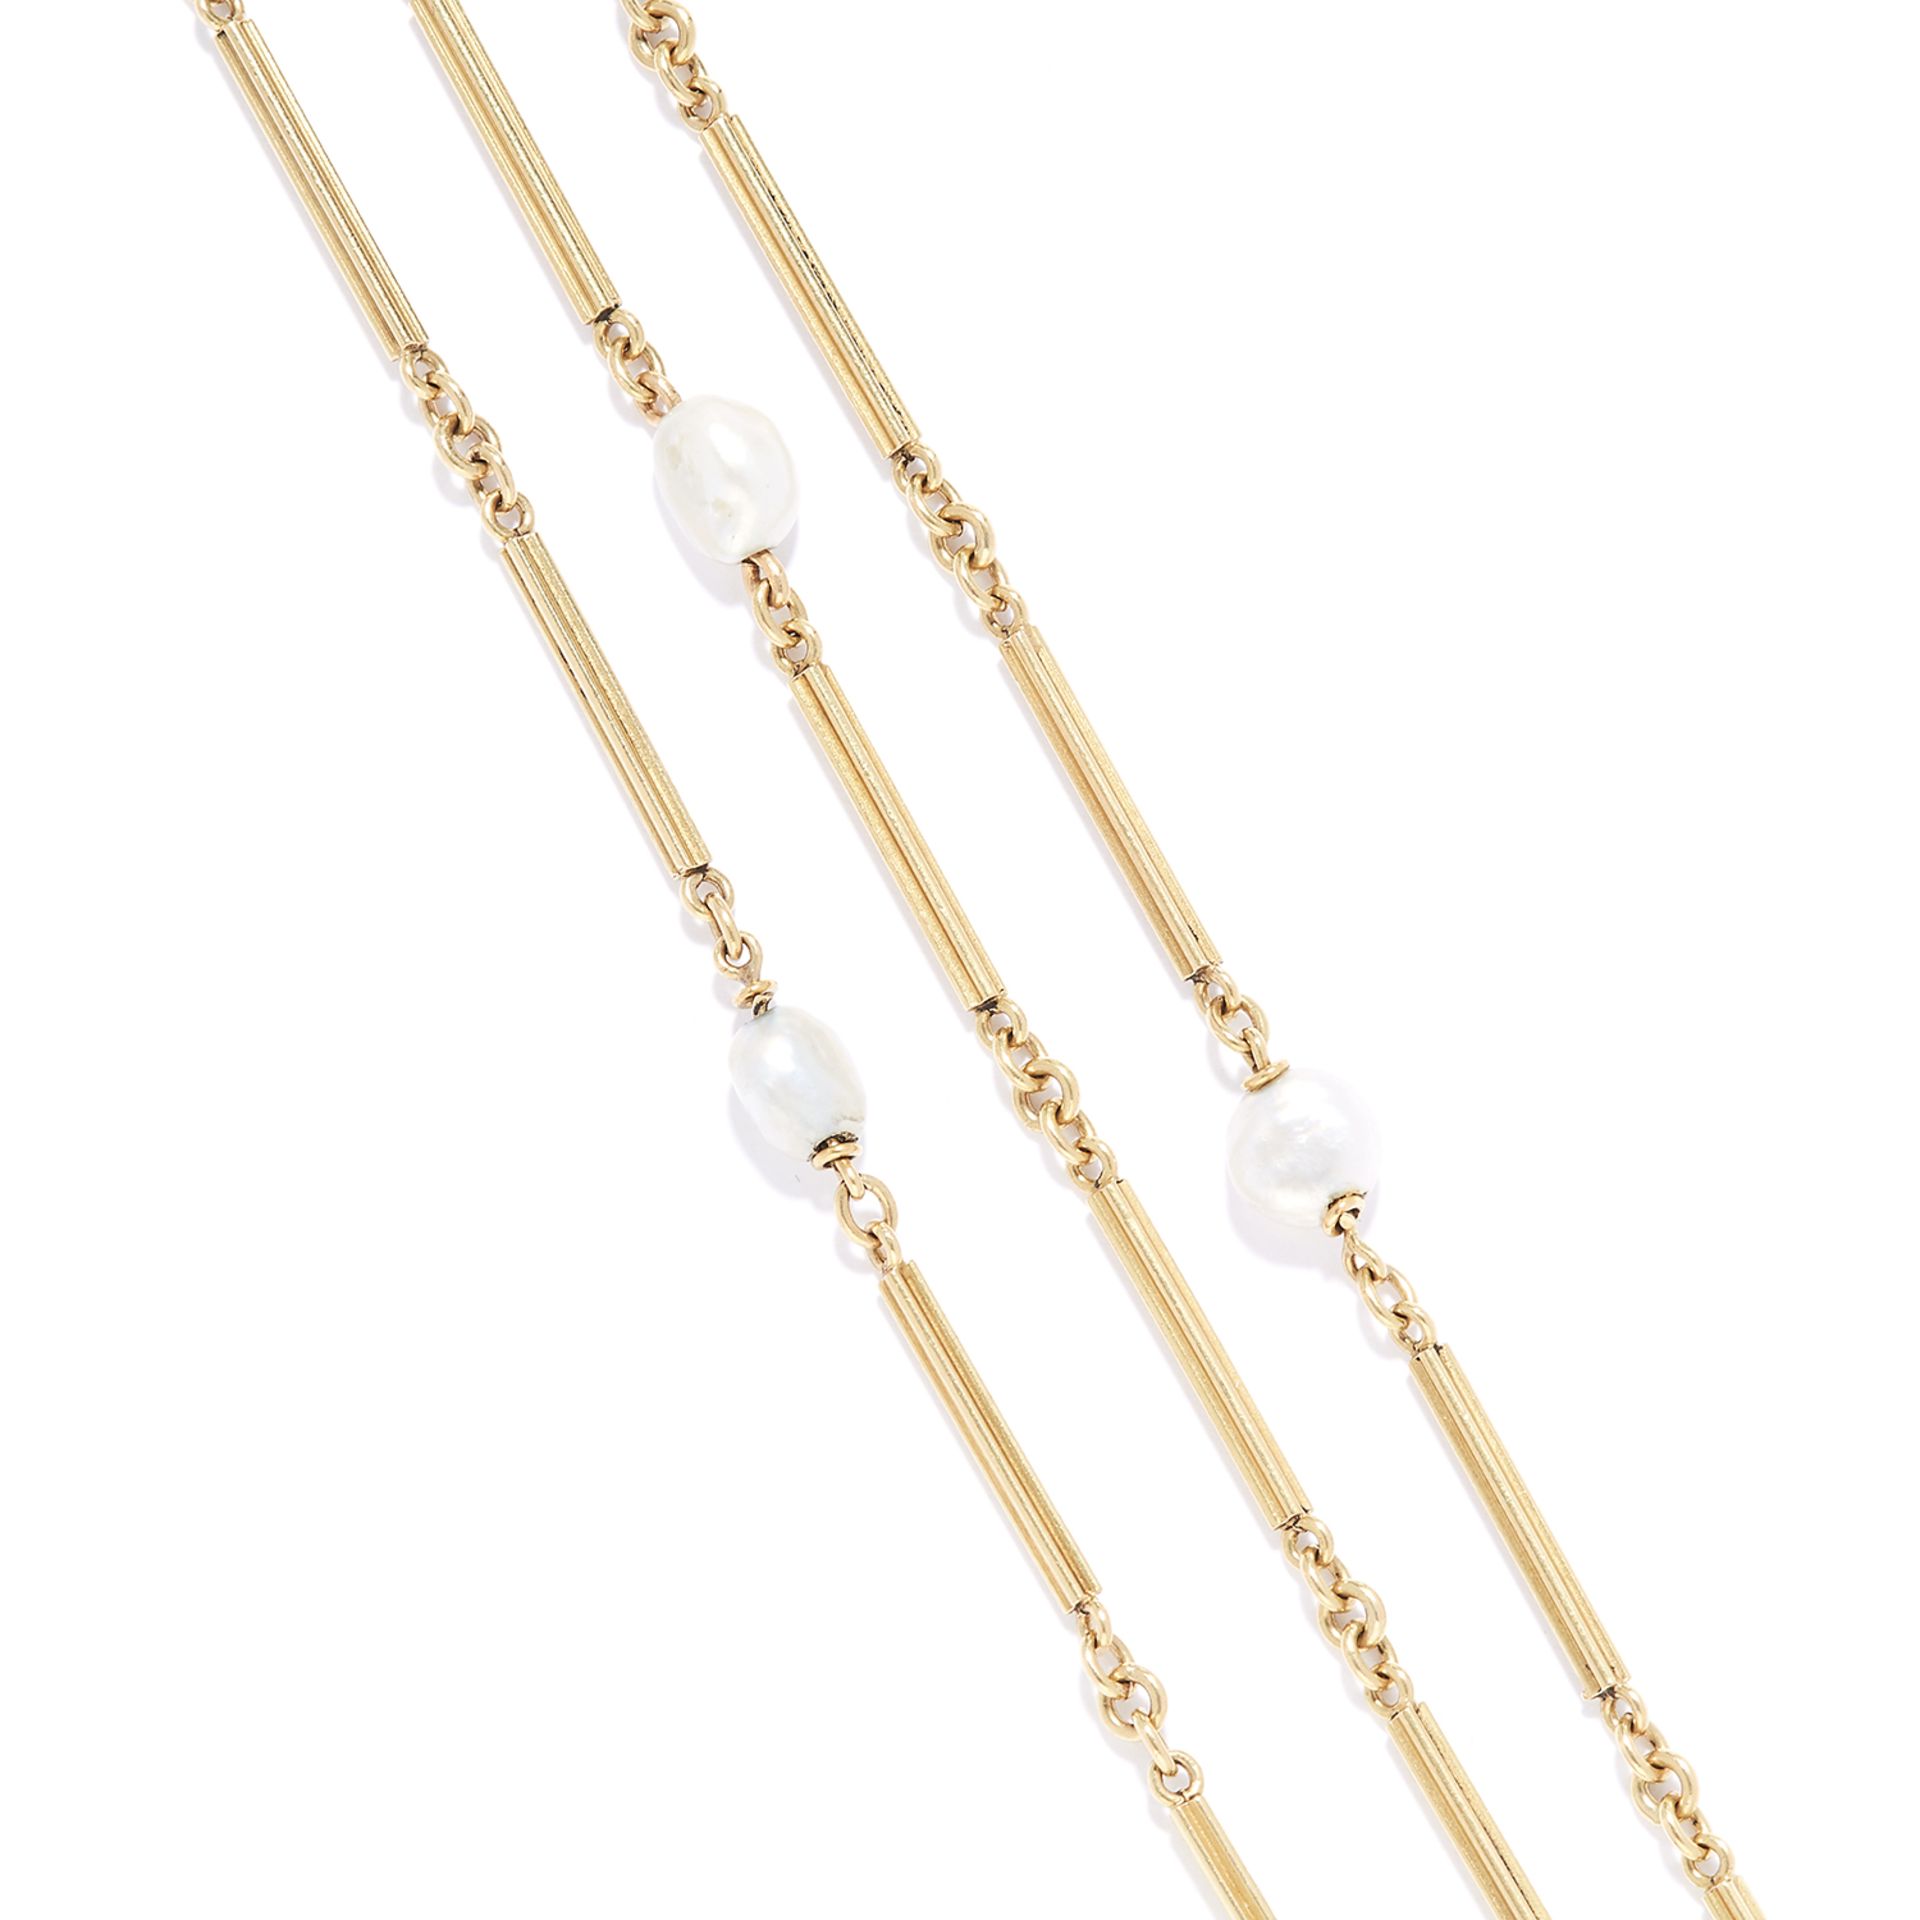 ANTIQUE PEARL LONGCHAIN SAUTOIR NECKLACE in high carat yellow gold, comprising a single row of fancy - Image 2 of 2